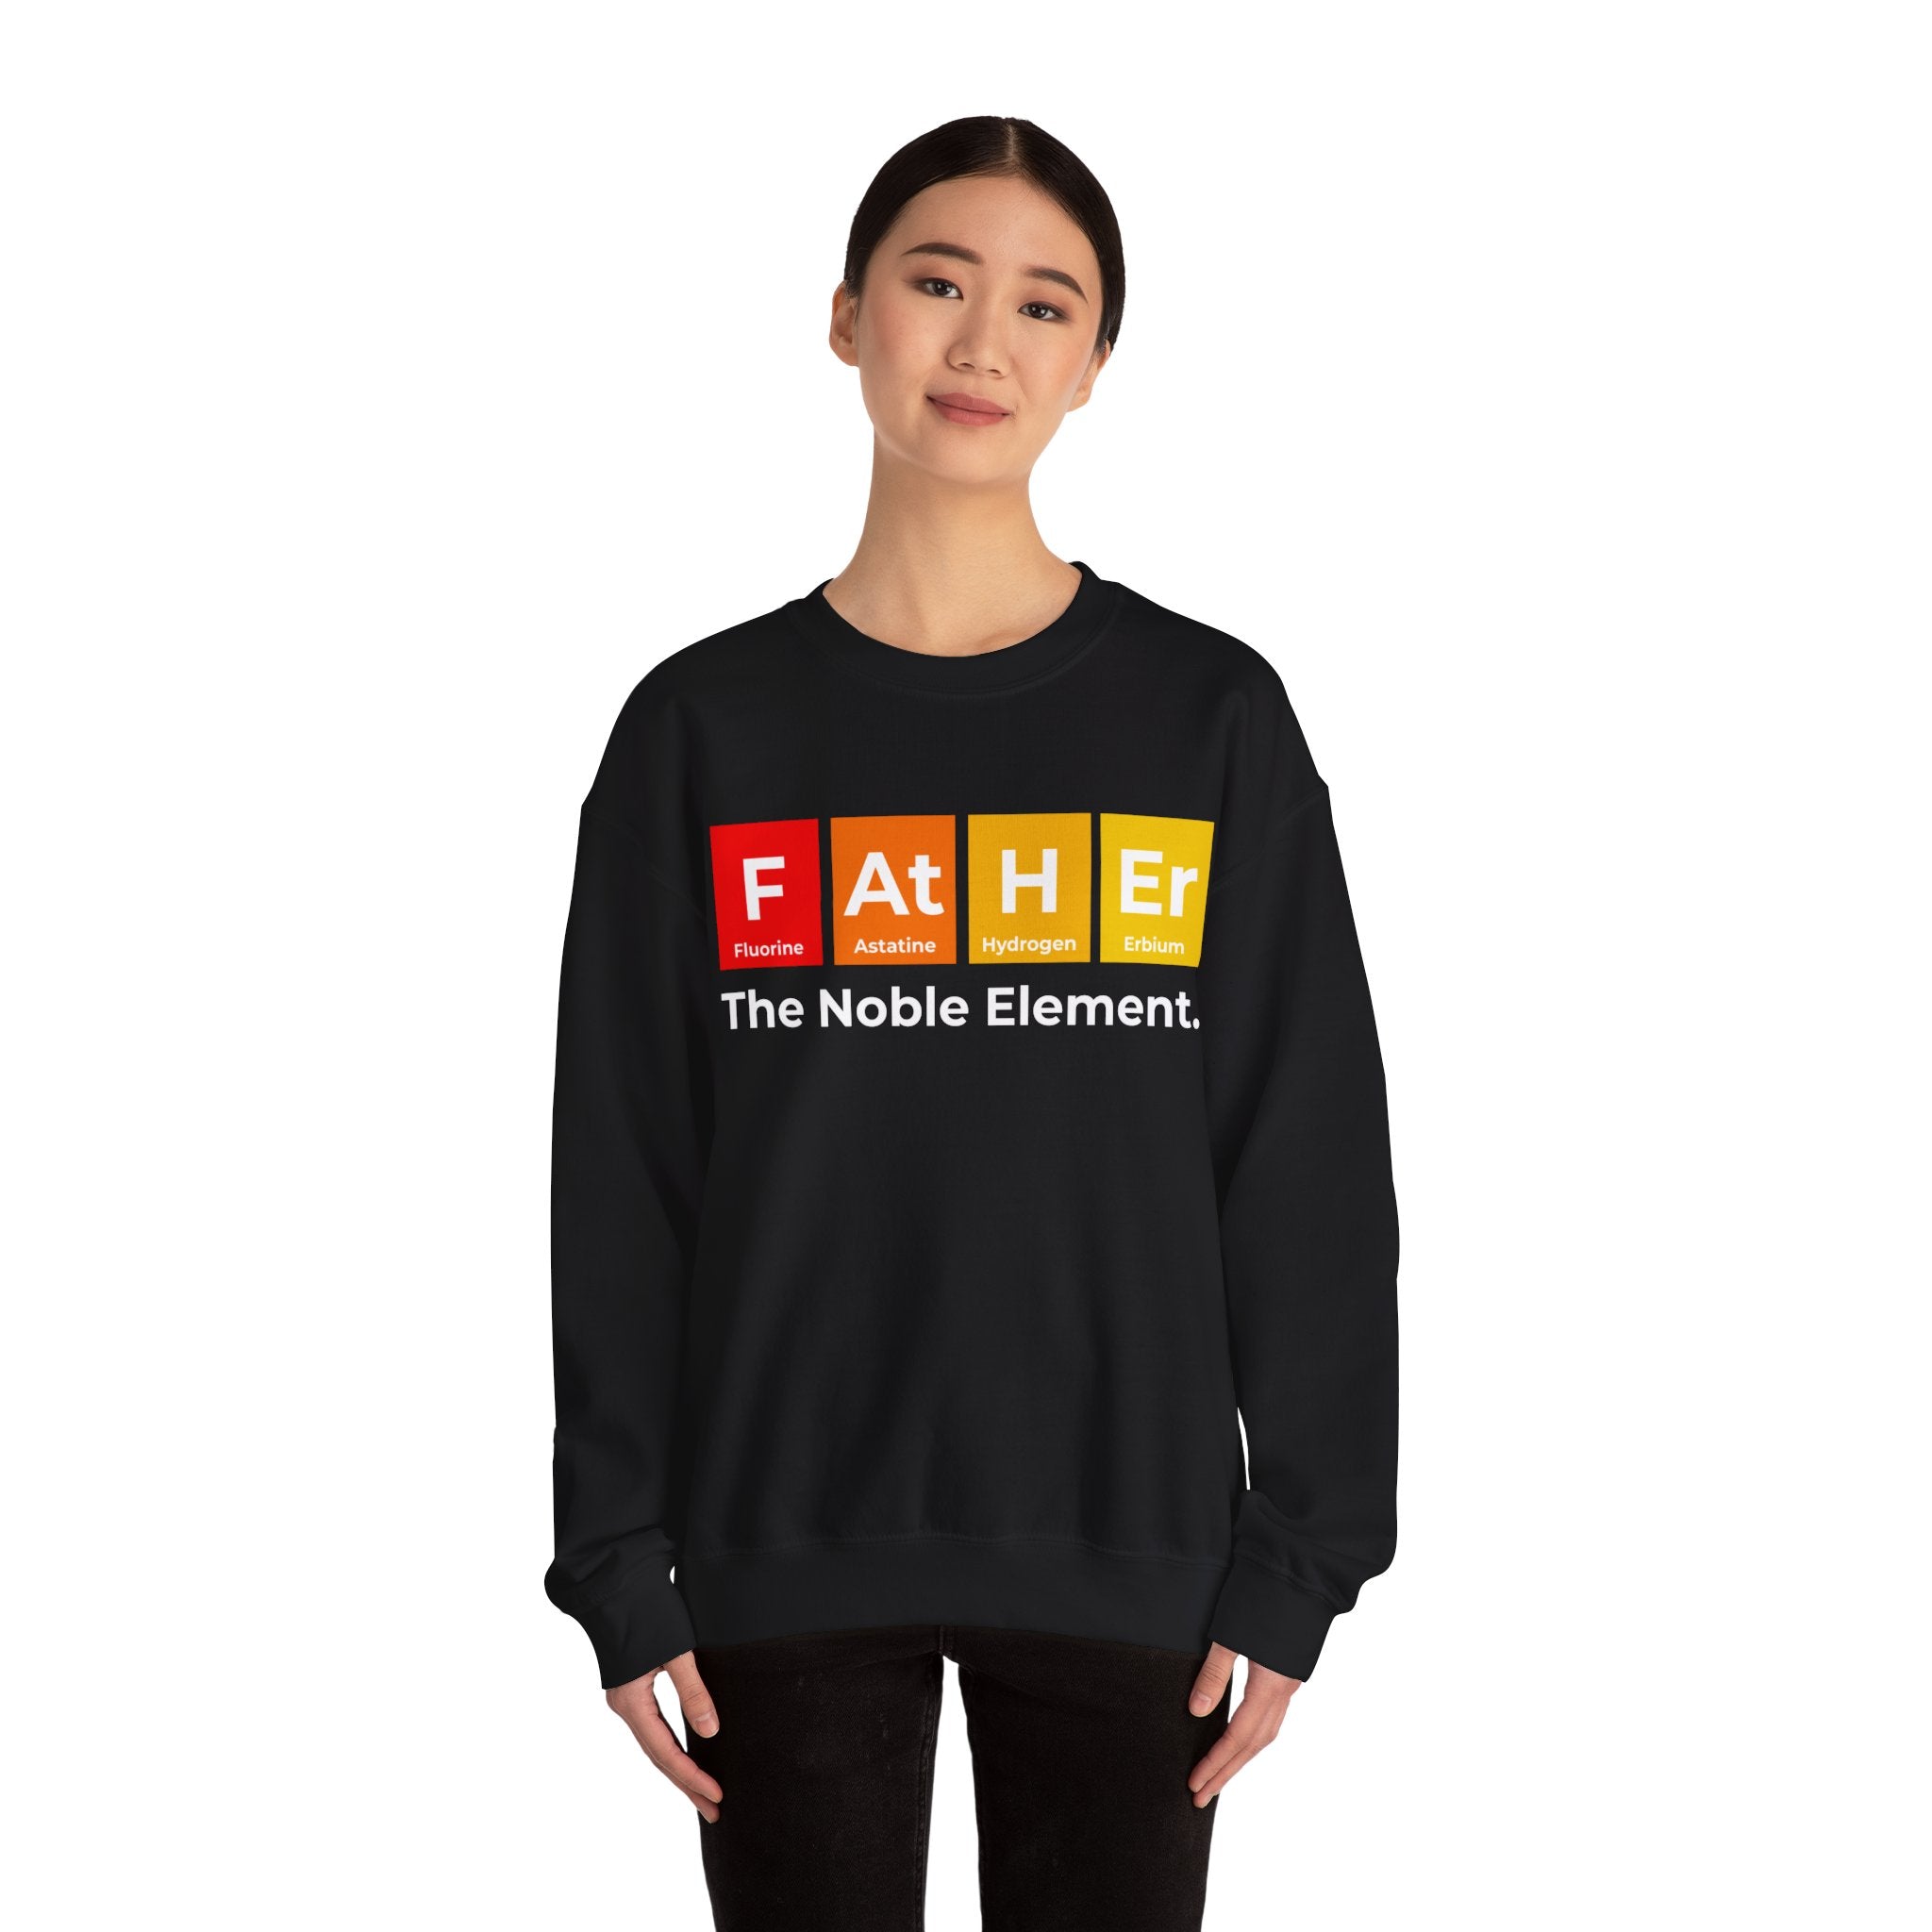 A person wearing a cozy and warm black sweatshirt with a periodic table-inspired design spells "Father" above the text "The Noble Element." Perfect for winter, this Father Graphic - Sweatshirt offers both comfort and style.